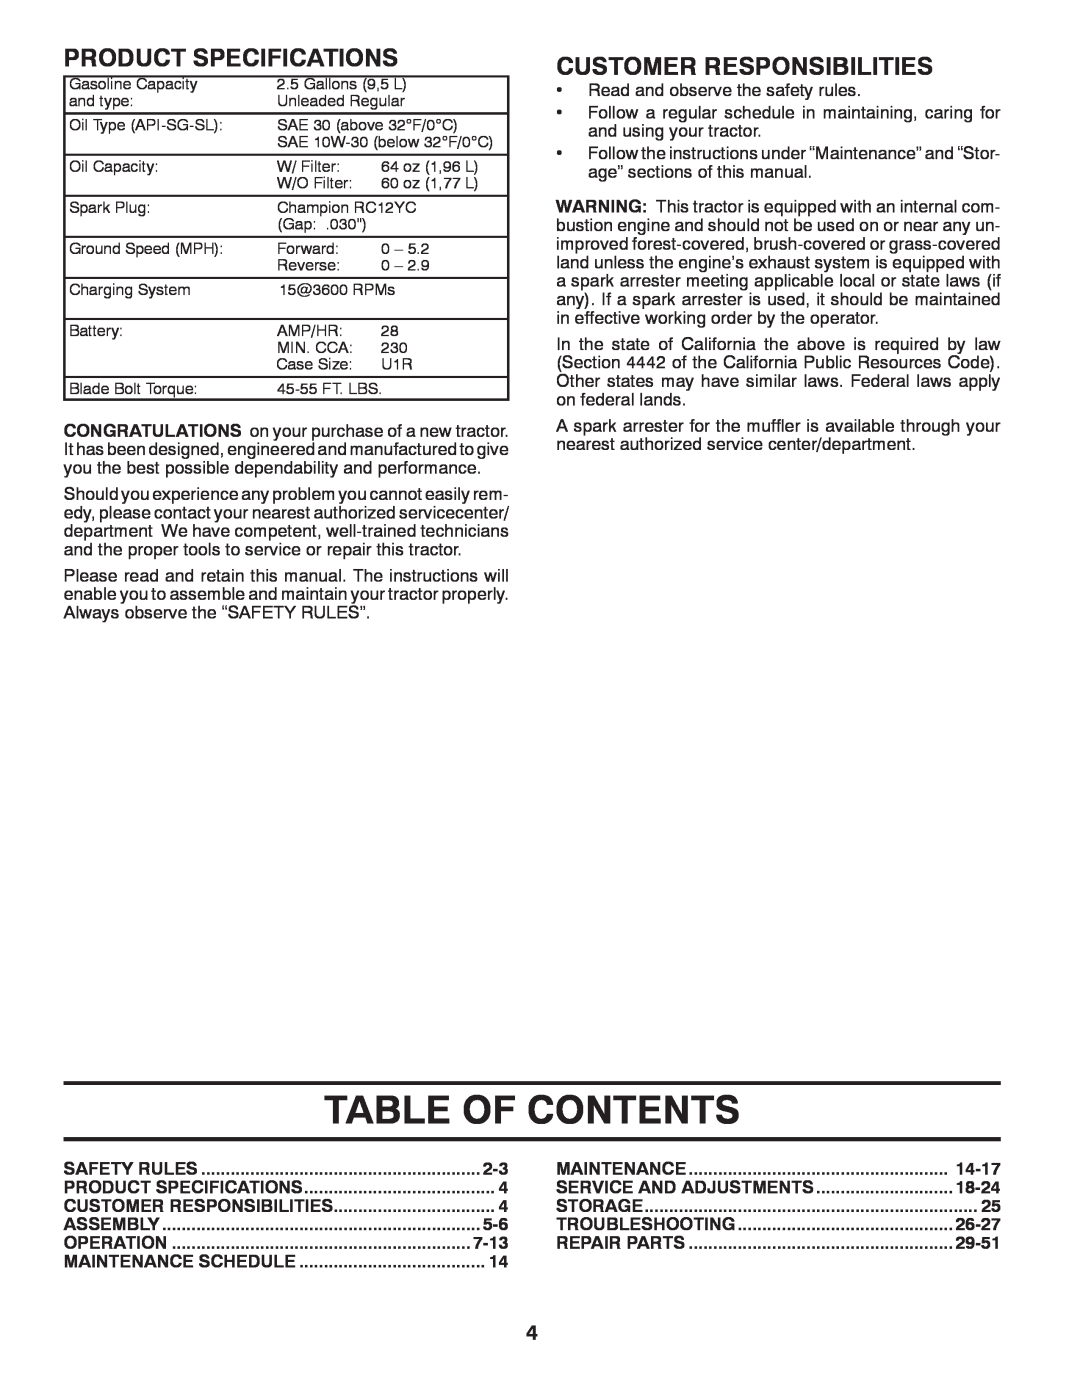 Husqvarna 917.289541 owner manual Table Of Contents, Product Specifications, Customer Responsibilities 